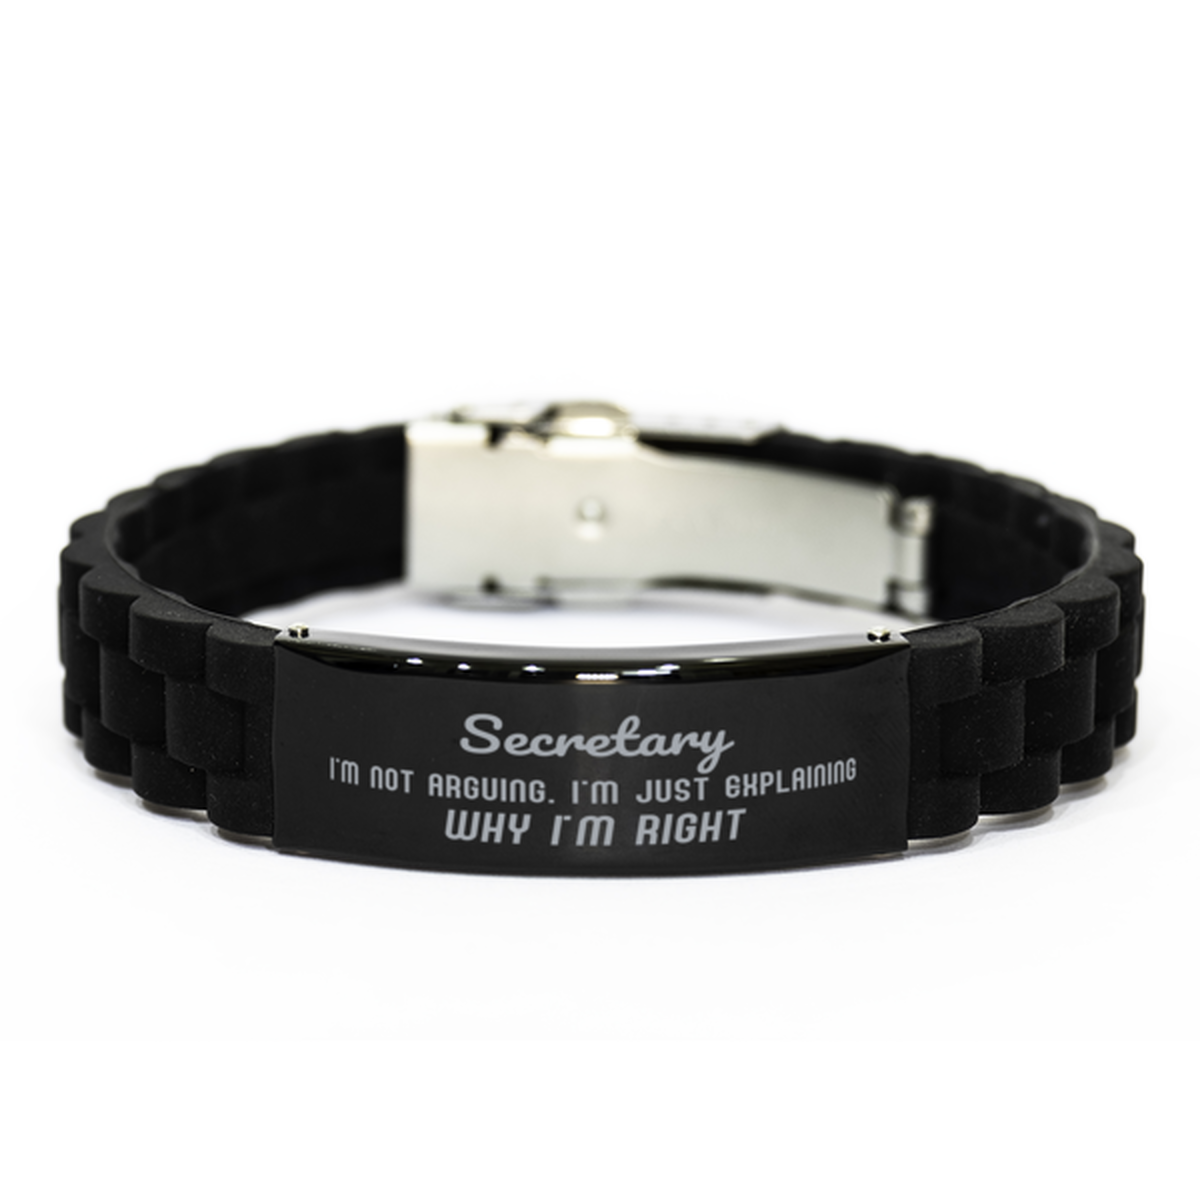 Secretary I'm not Arguing. I'm Just Explaining Why I'm RIGHT Black Glidelock Clasp Bracelet, Funny Saying Quote Secretary Gifts For Secretary Graduation Birthday Christmas Gifts for Men Women Coworker